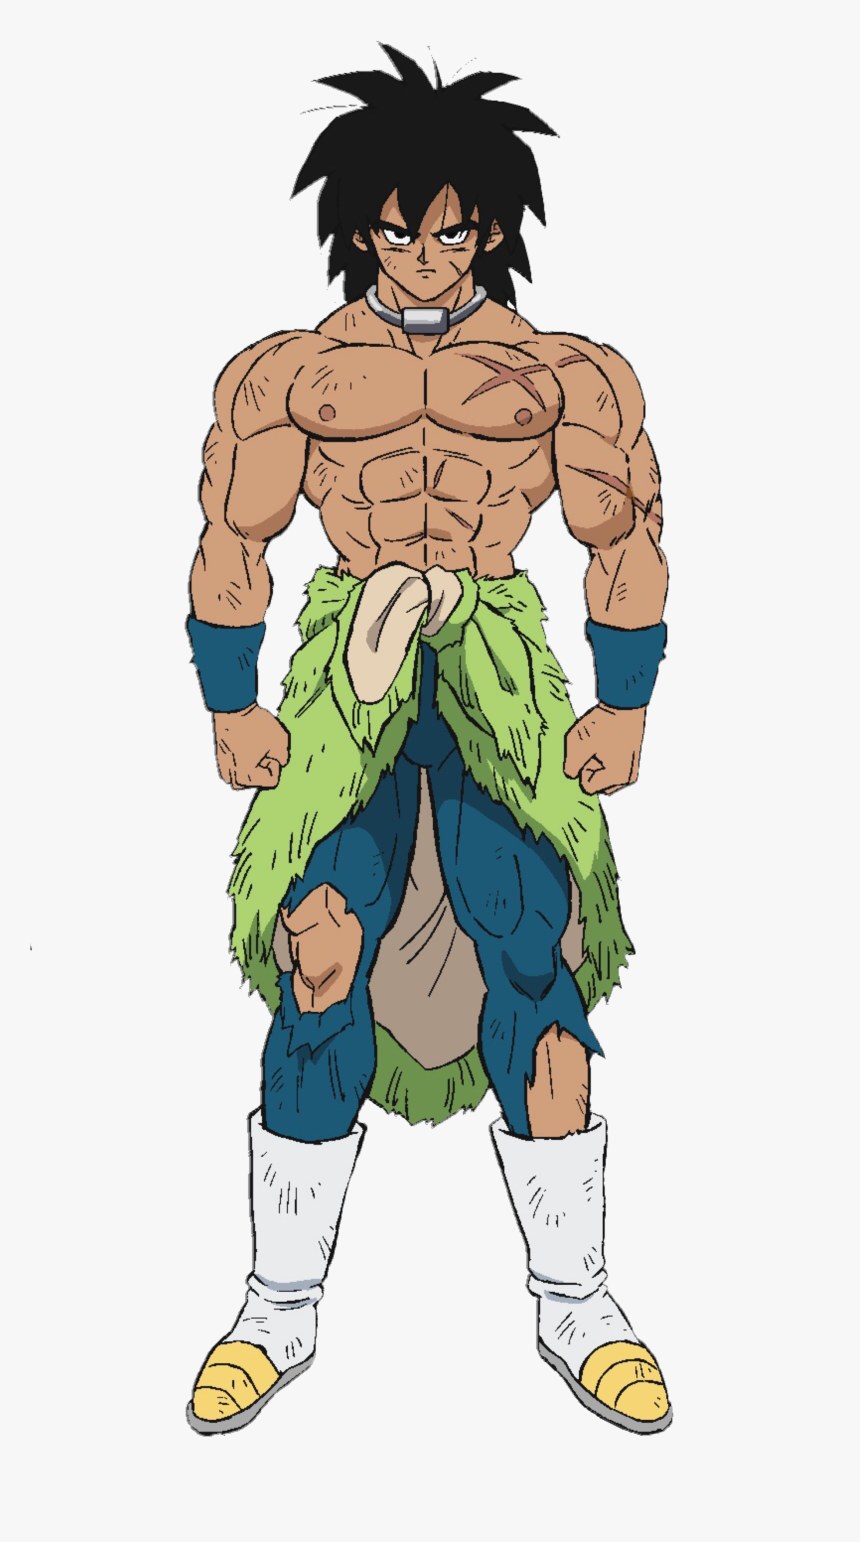 no-caption-provided-broly-dbs-base-form-hd-png-download-kindpng